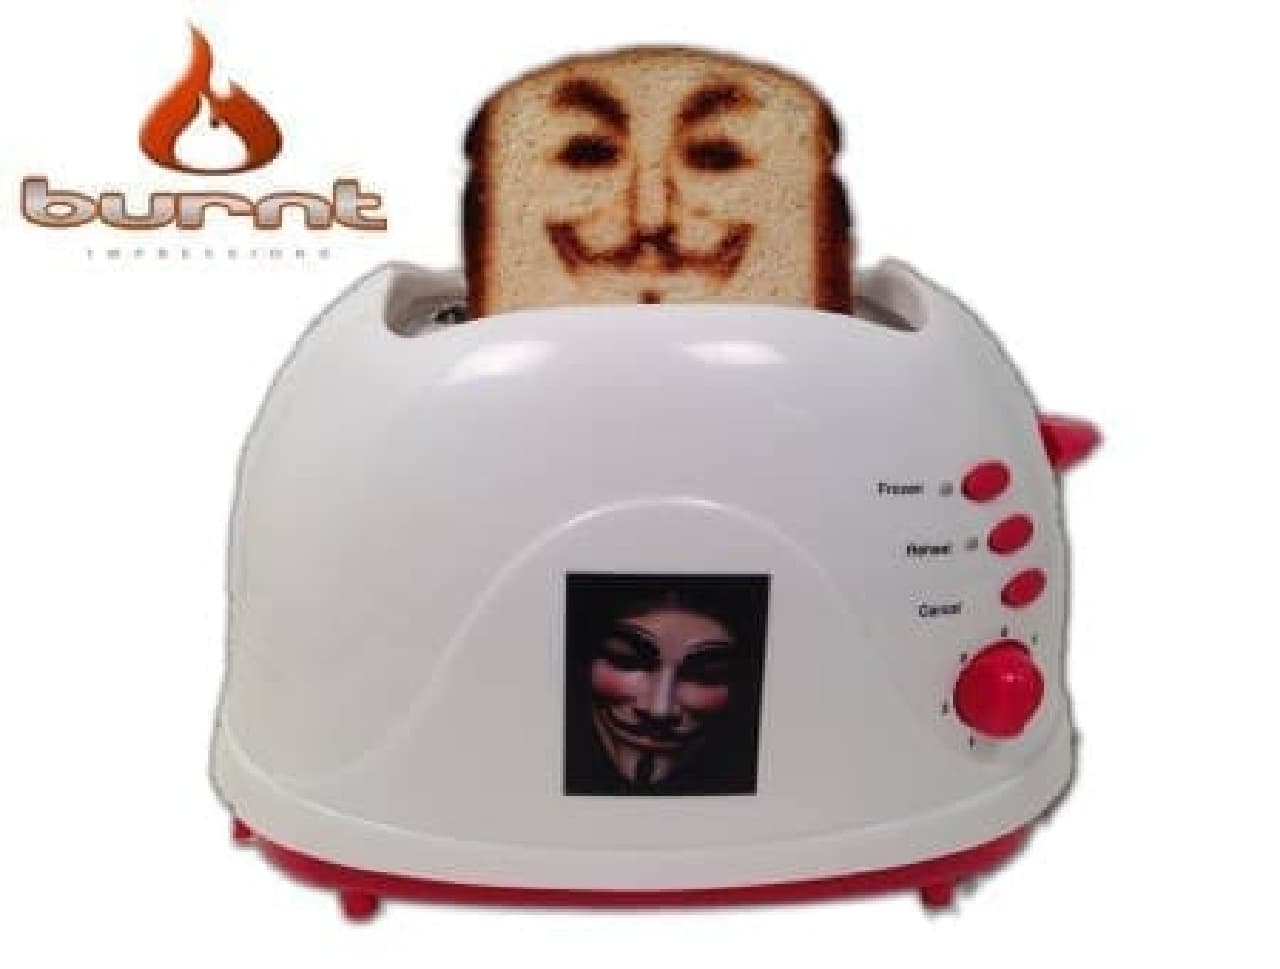 Toaster available in blue, red, yellow, green, and powder (light blue)